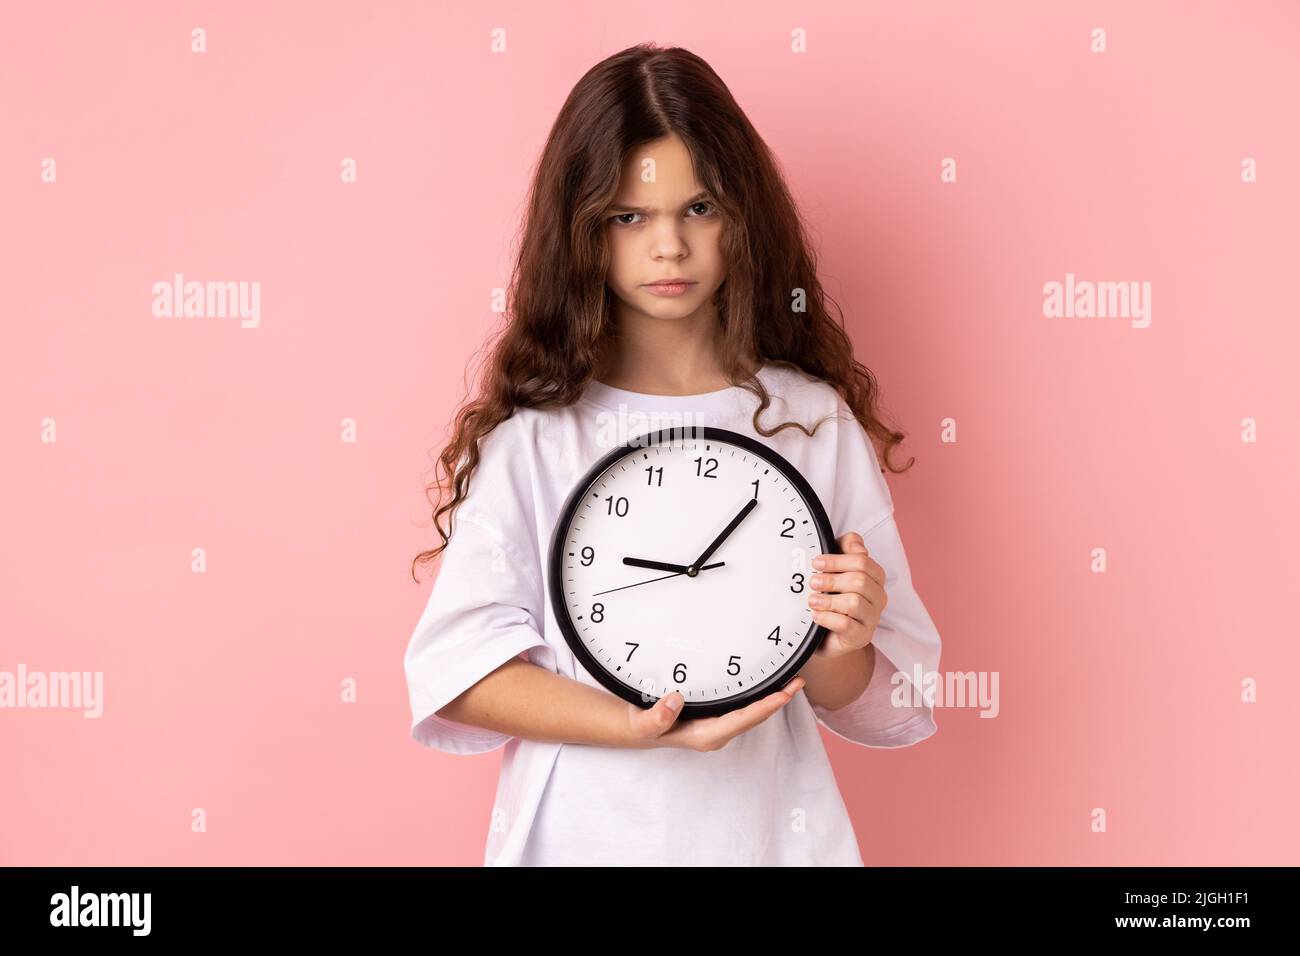 Portrait of little girl wearing white T-shirt holding wall clock, being unhappy, deadline, being sad, not finished her task in time. Indoor studio shot isolated on pink background. Stock Photo